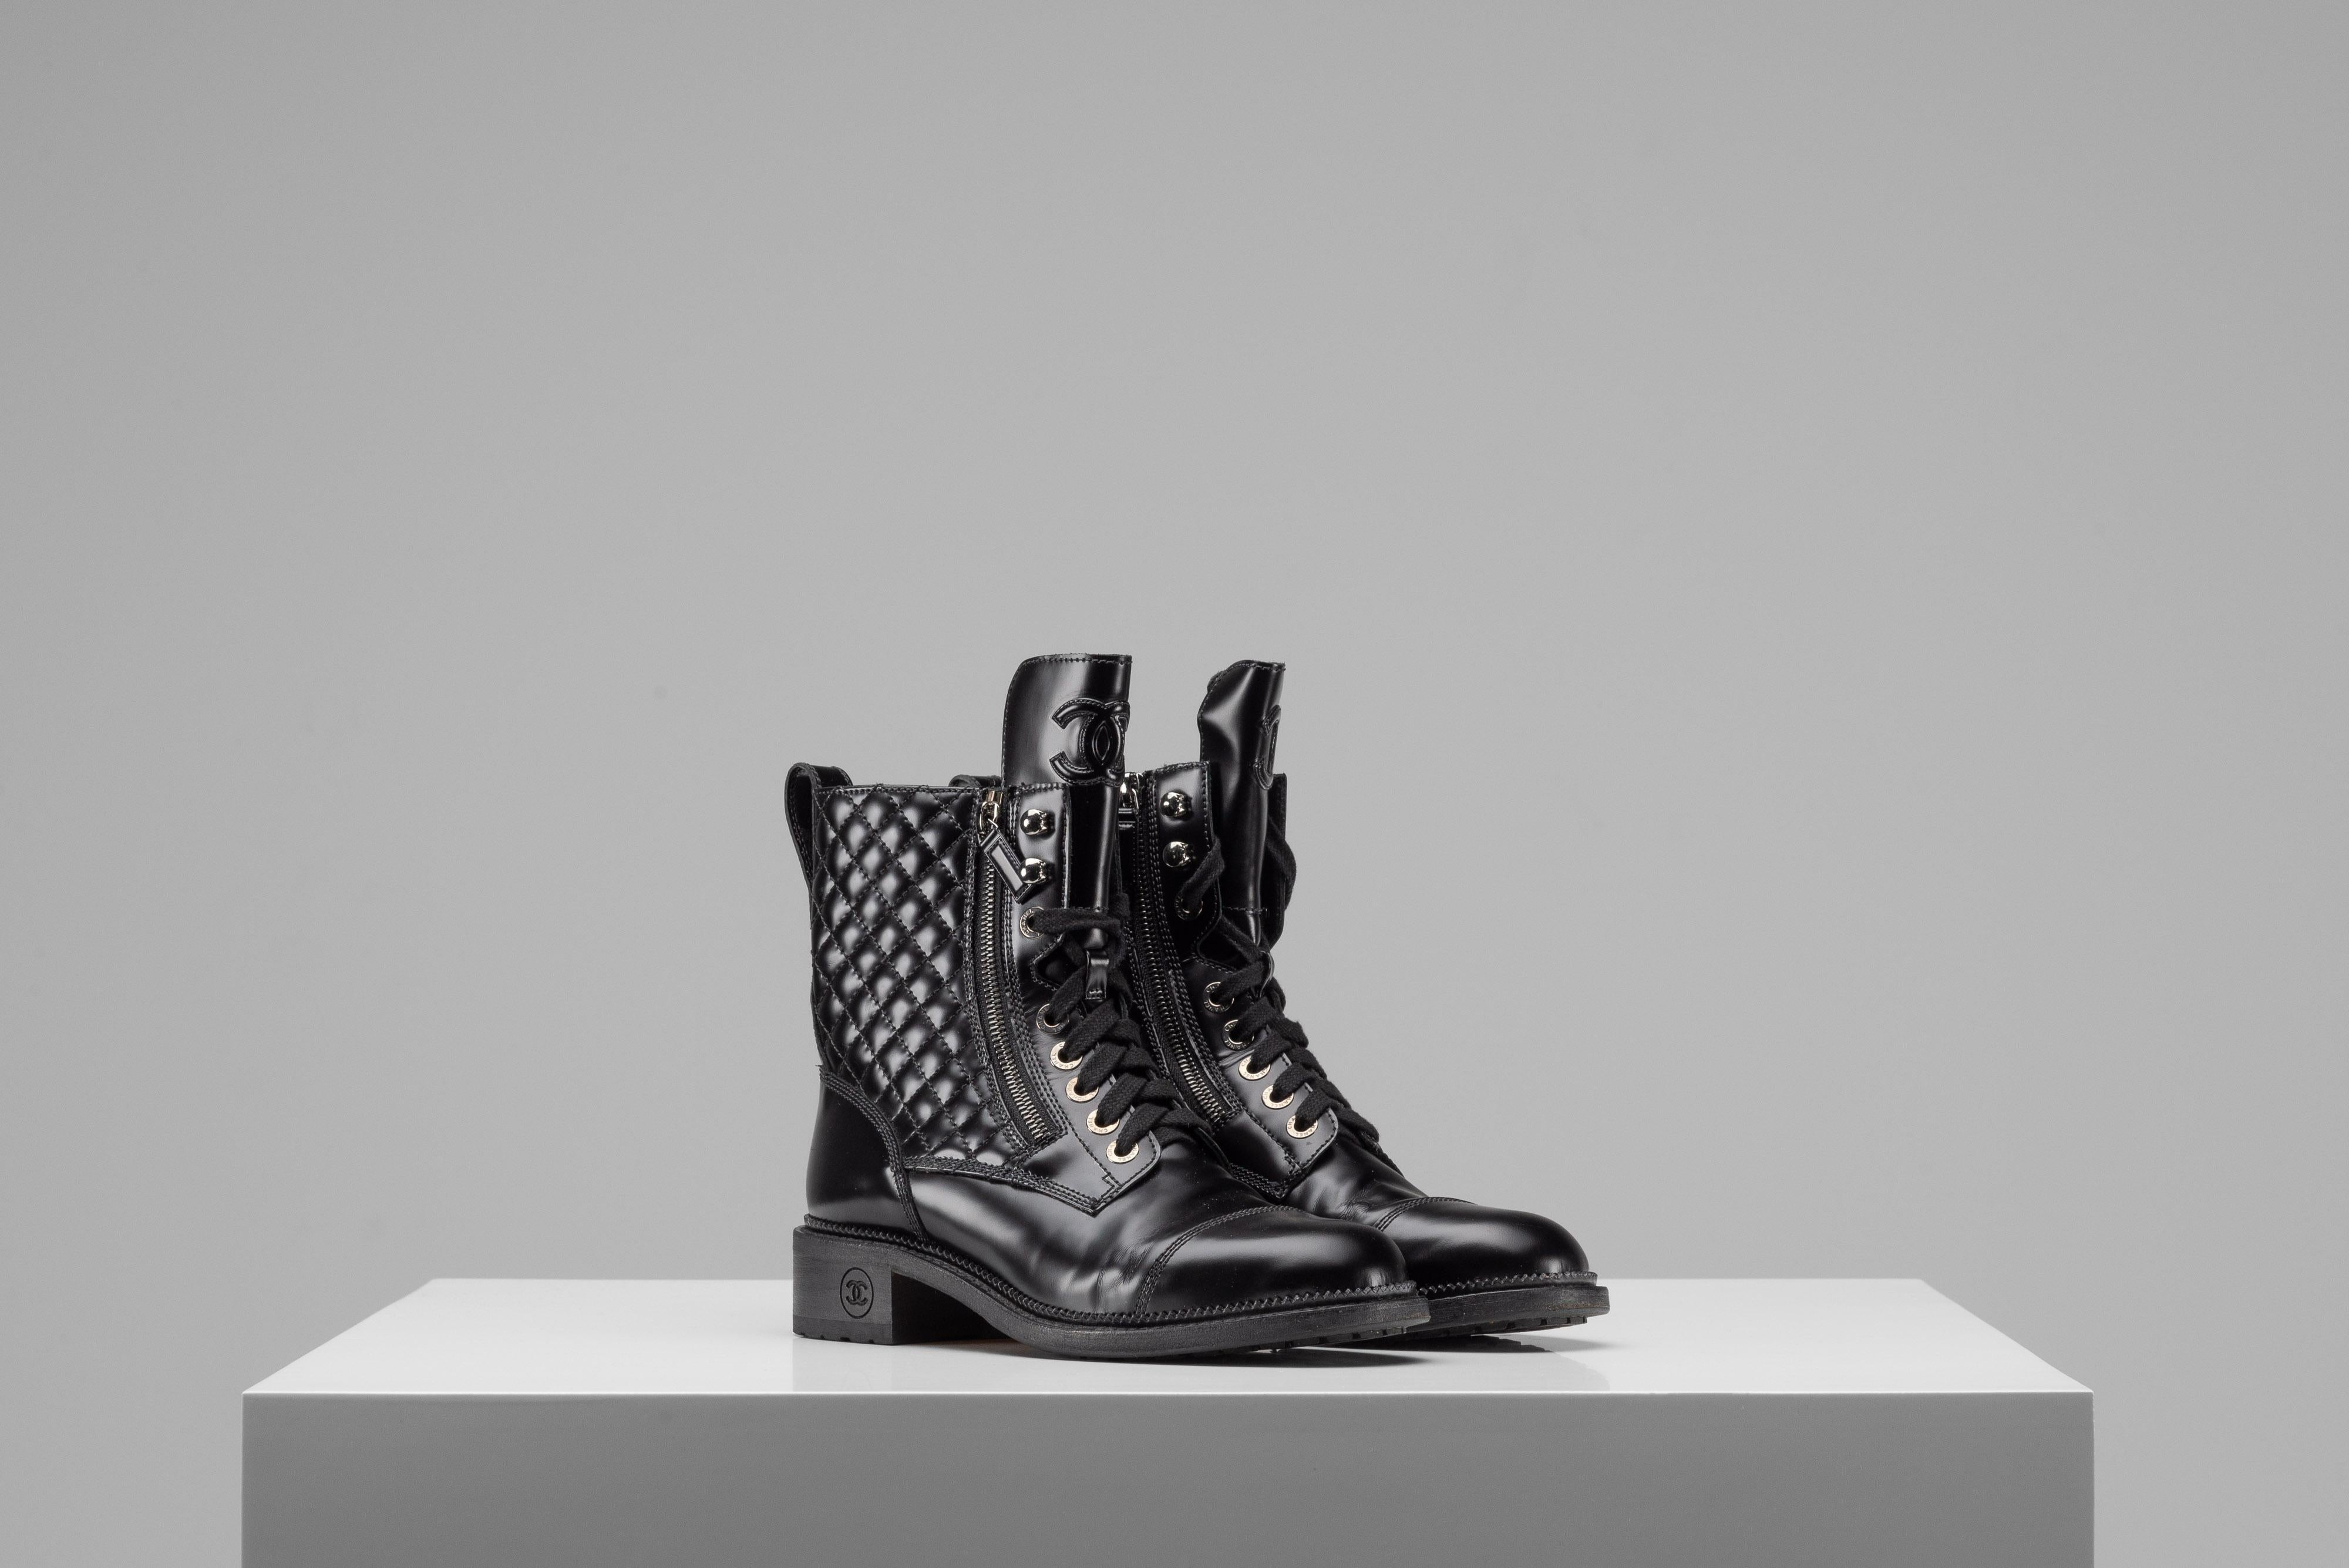 From the collection of SAVINETI we offer these Chanel Black Combat Boots:
-    Brand: Chanel
-    Model: Combat Boots
-    Condition: Good Condition 
-    Color: Black
-    Extras: Chanel dustbag & box

Authenticity is our core value at SAVINETI and